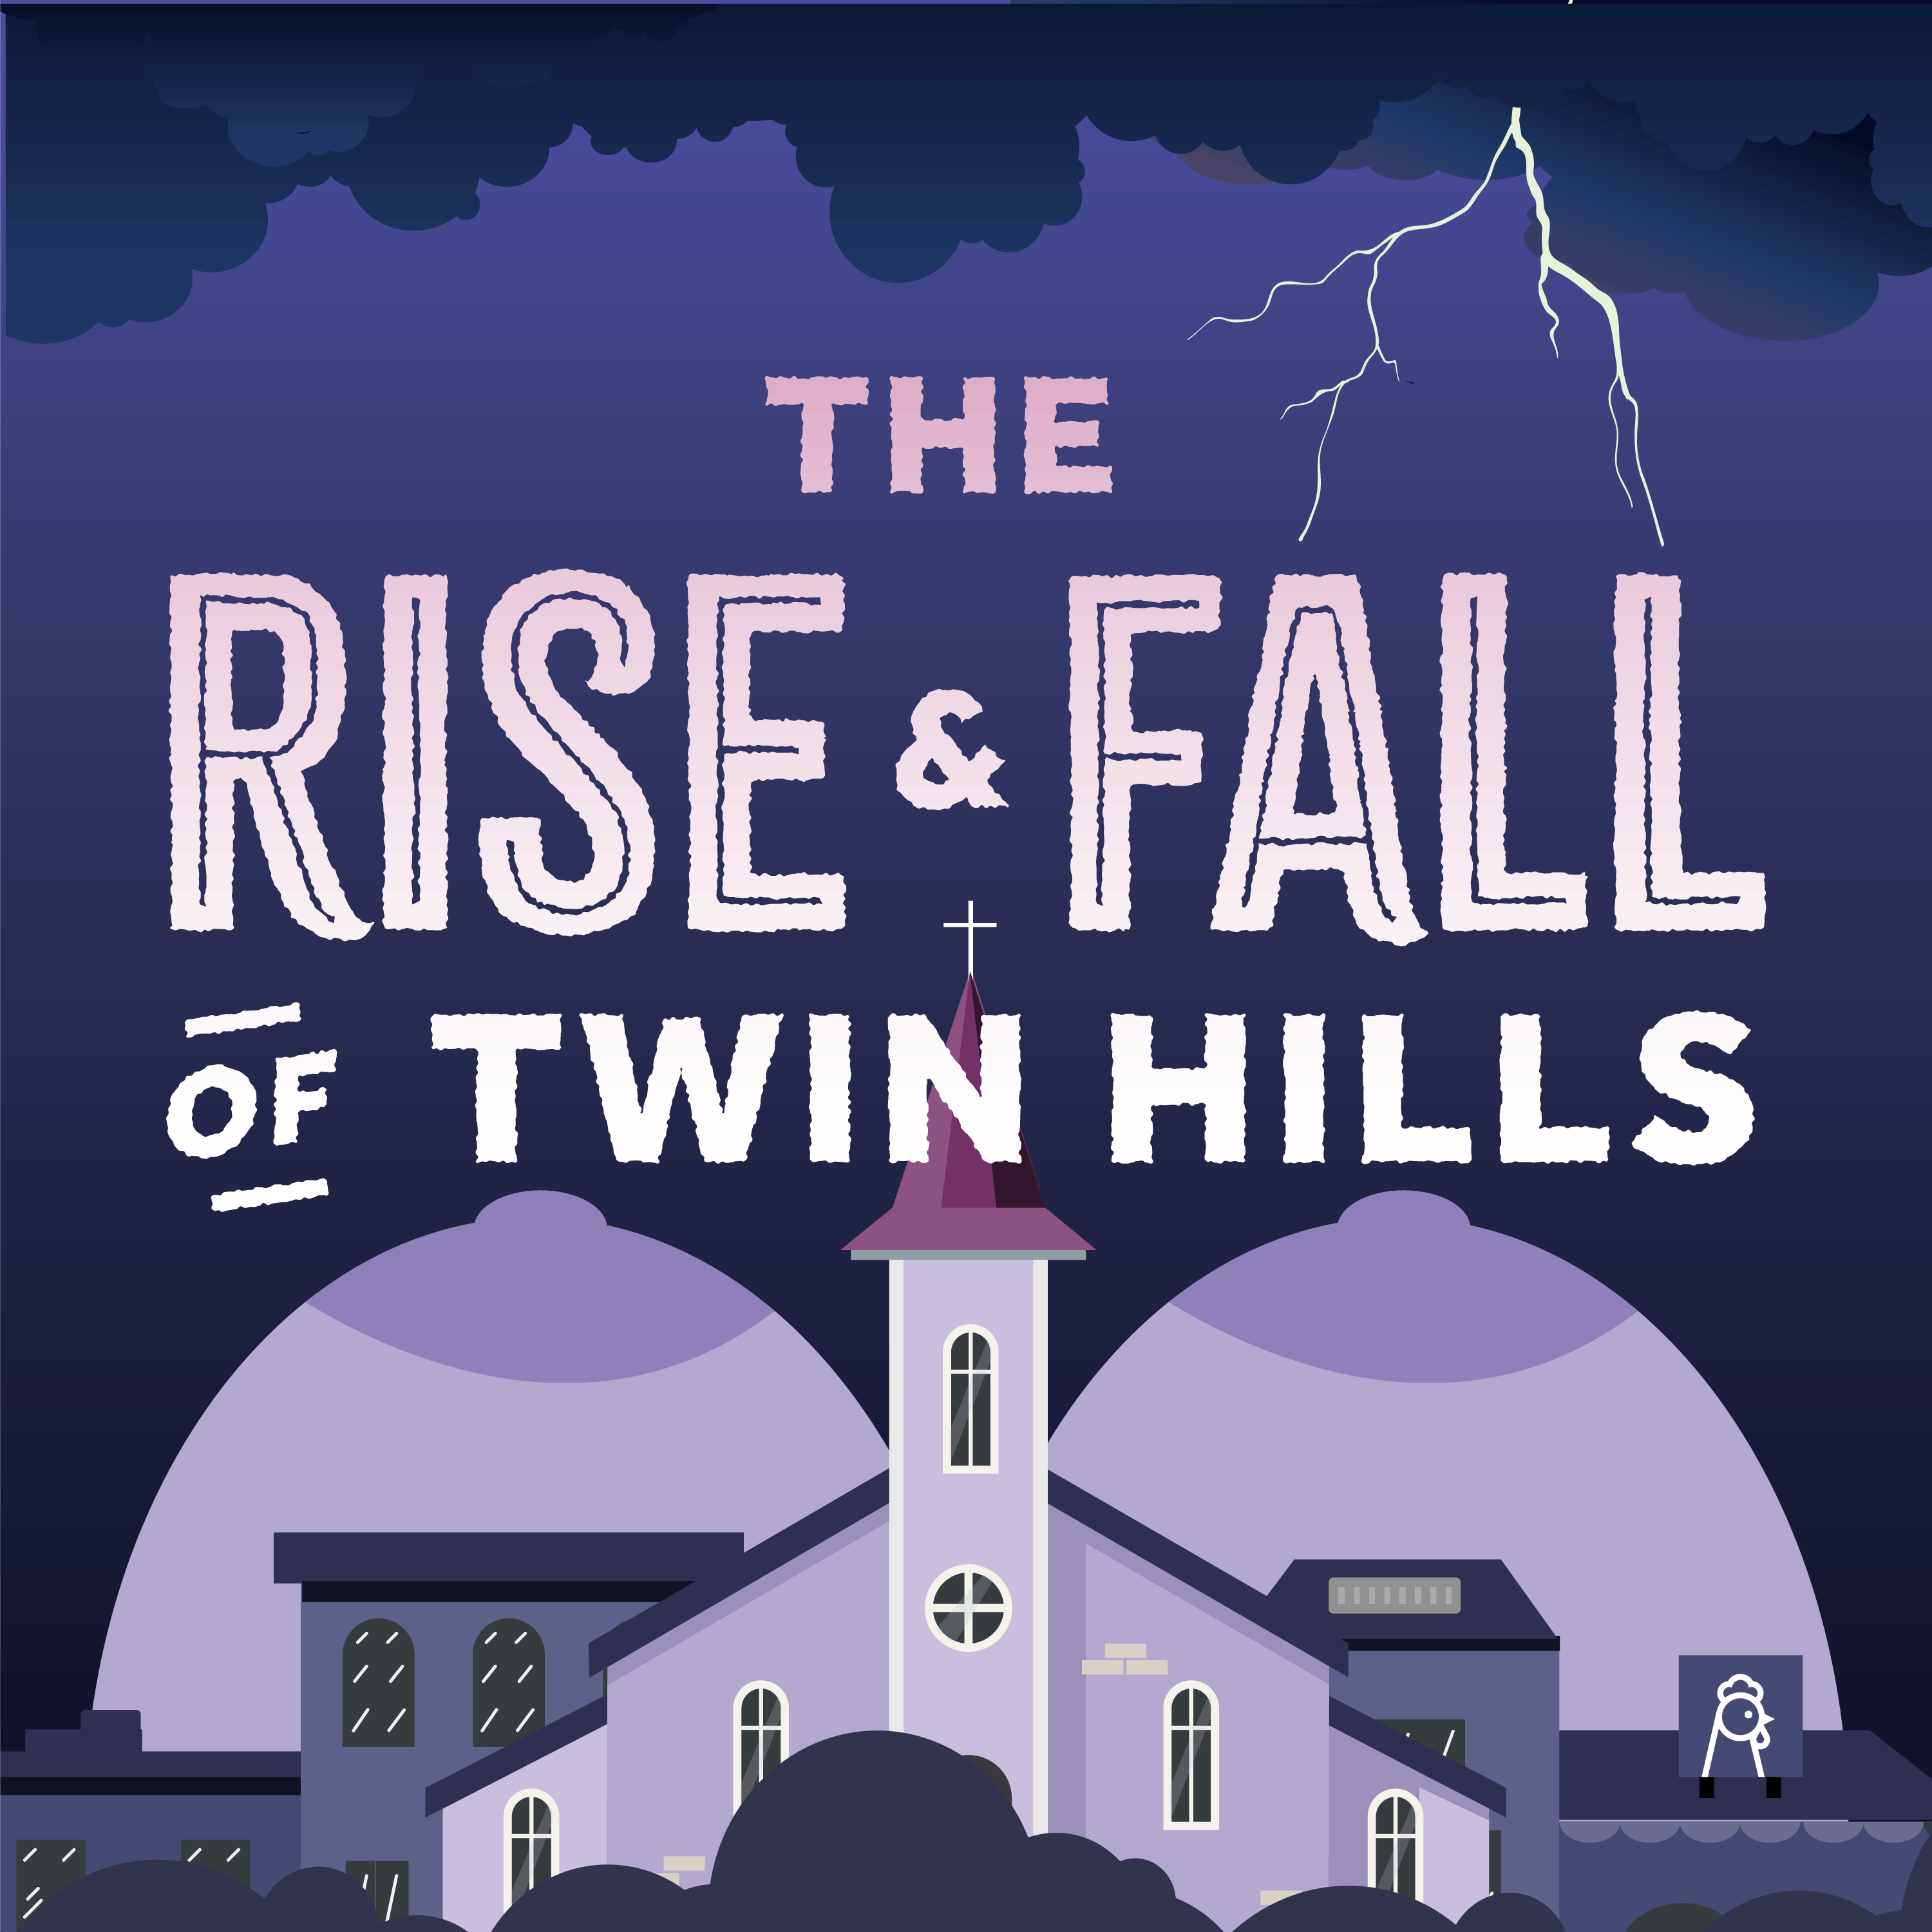 Part 3: The Rise and Fall of Twin Hills 